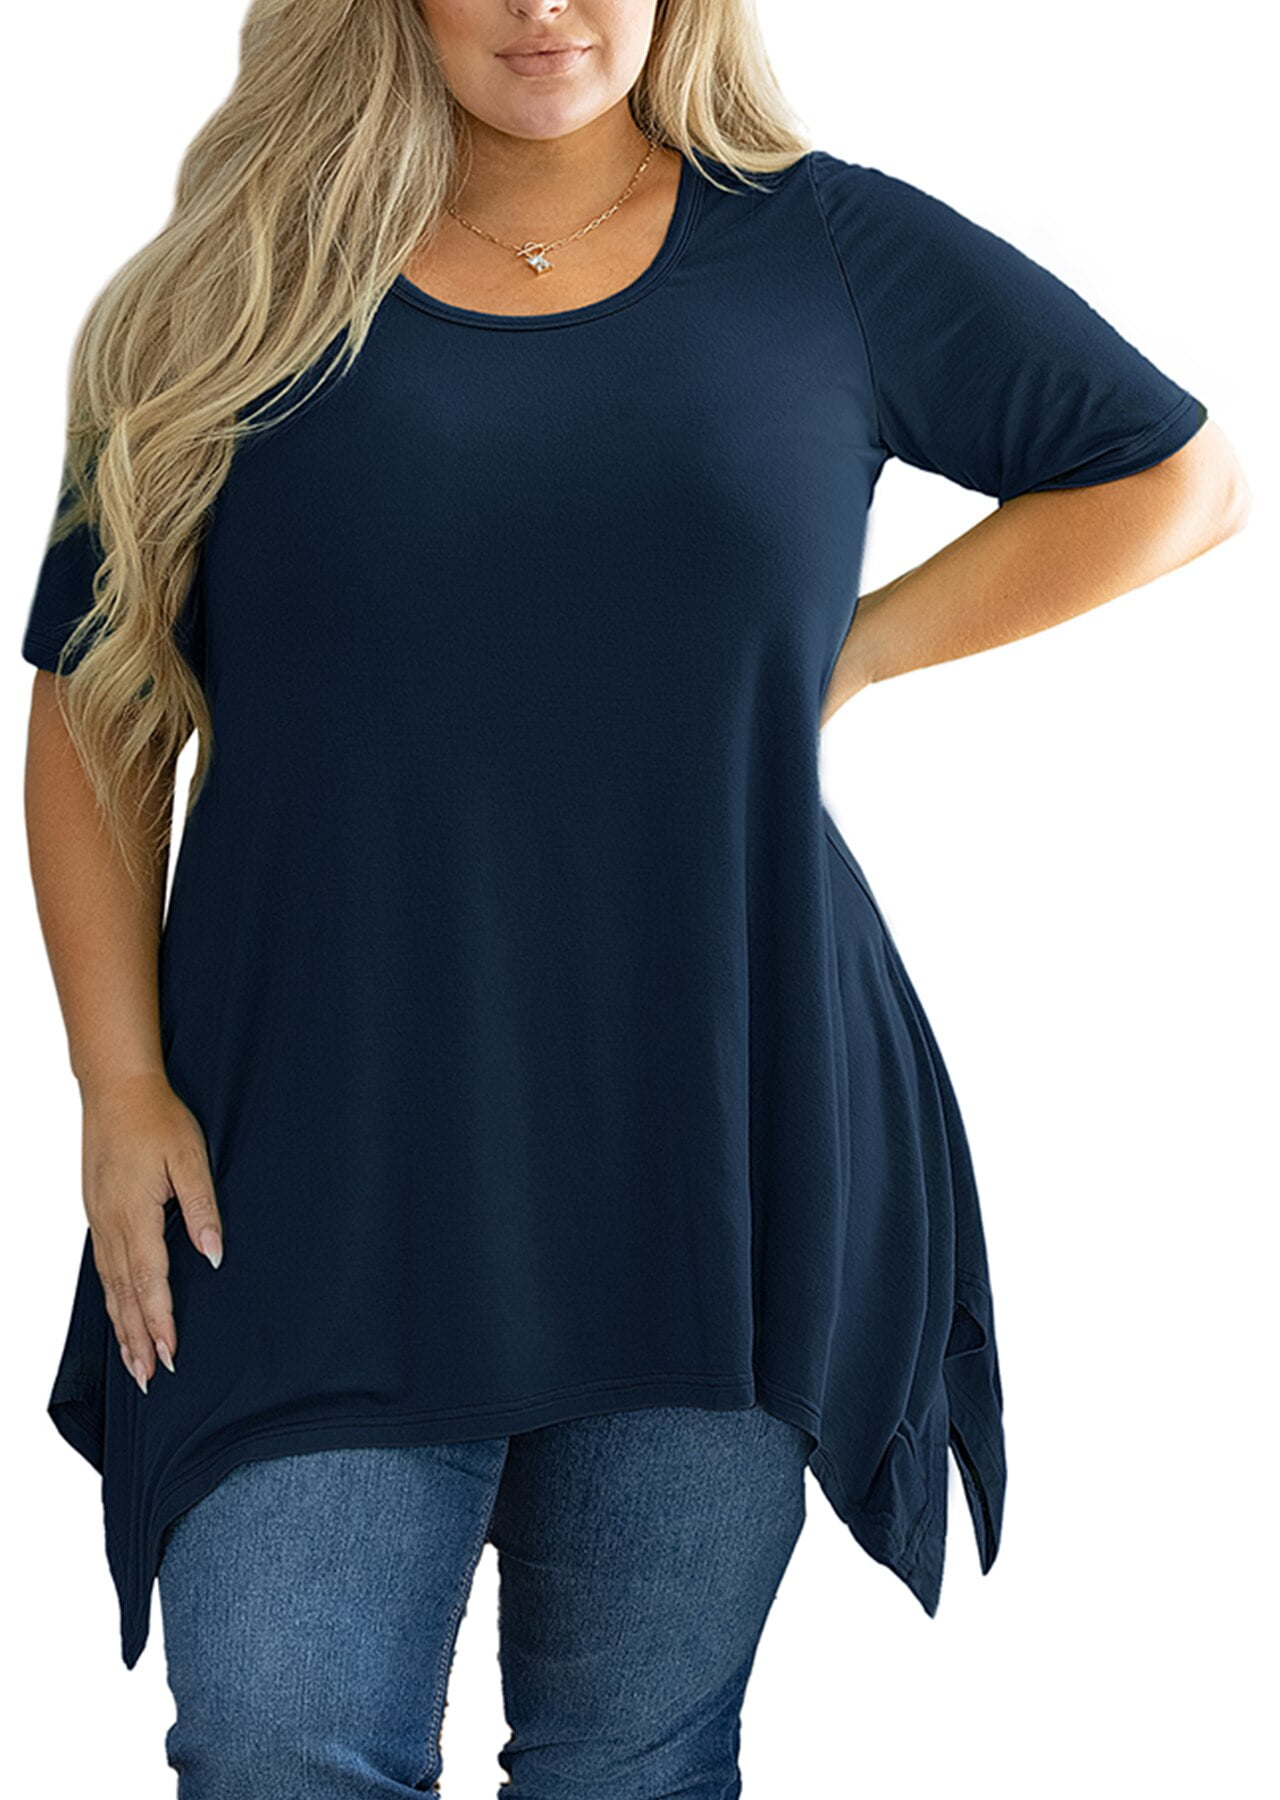 SHOWMALL Plus Size Clothing for Women Tunic Tops Short Sleeve Navy Blue 2X  Summer Blouse Swing Tee Crewneck Clothes Flowy Shirt for Leggings 